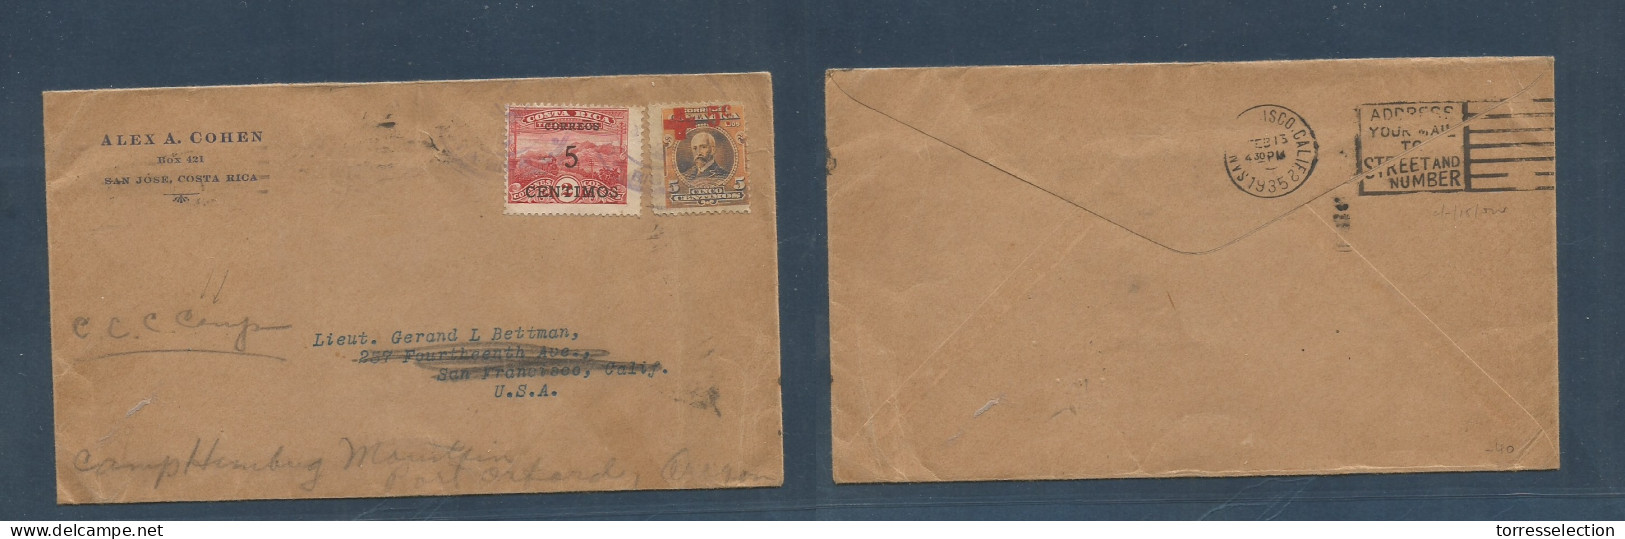 COSTA RICA. 1935 (Feb) San Jose - USA, S. Fco. Ovptd Issues + 5c (x2) Issues. Addressed To Military Ccc. Camp. Interesti - Costa Rica